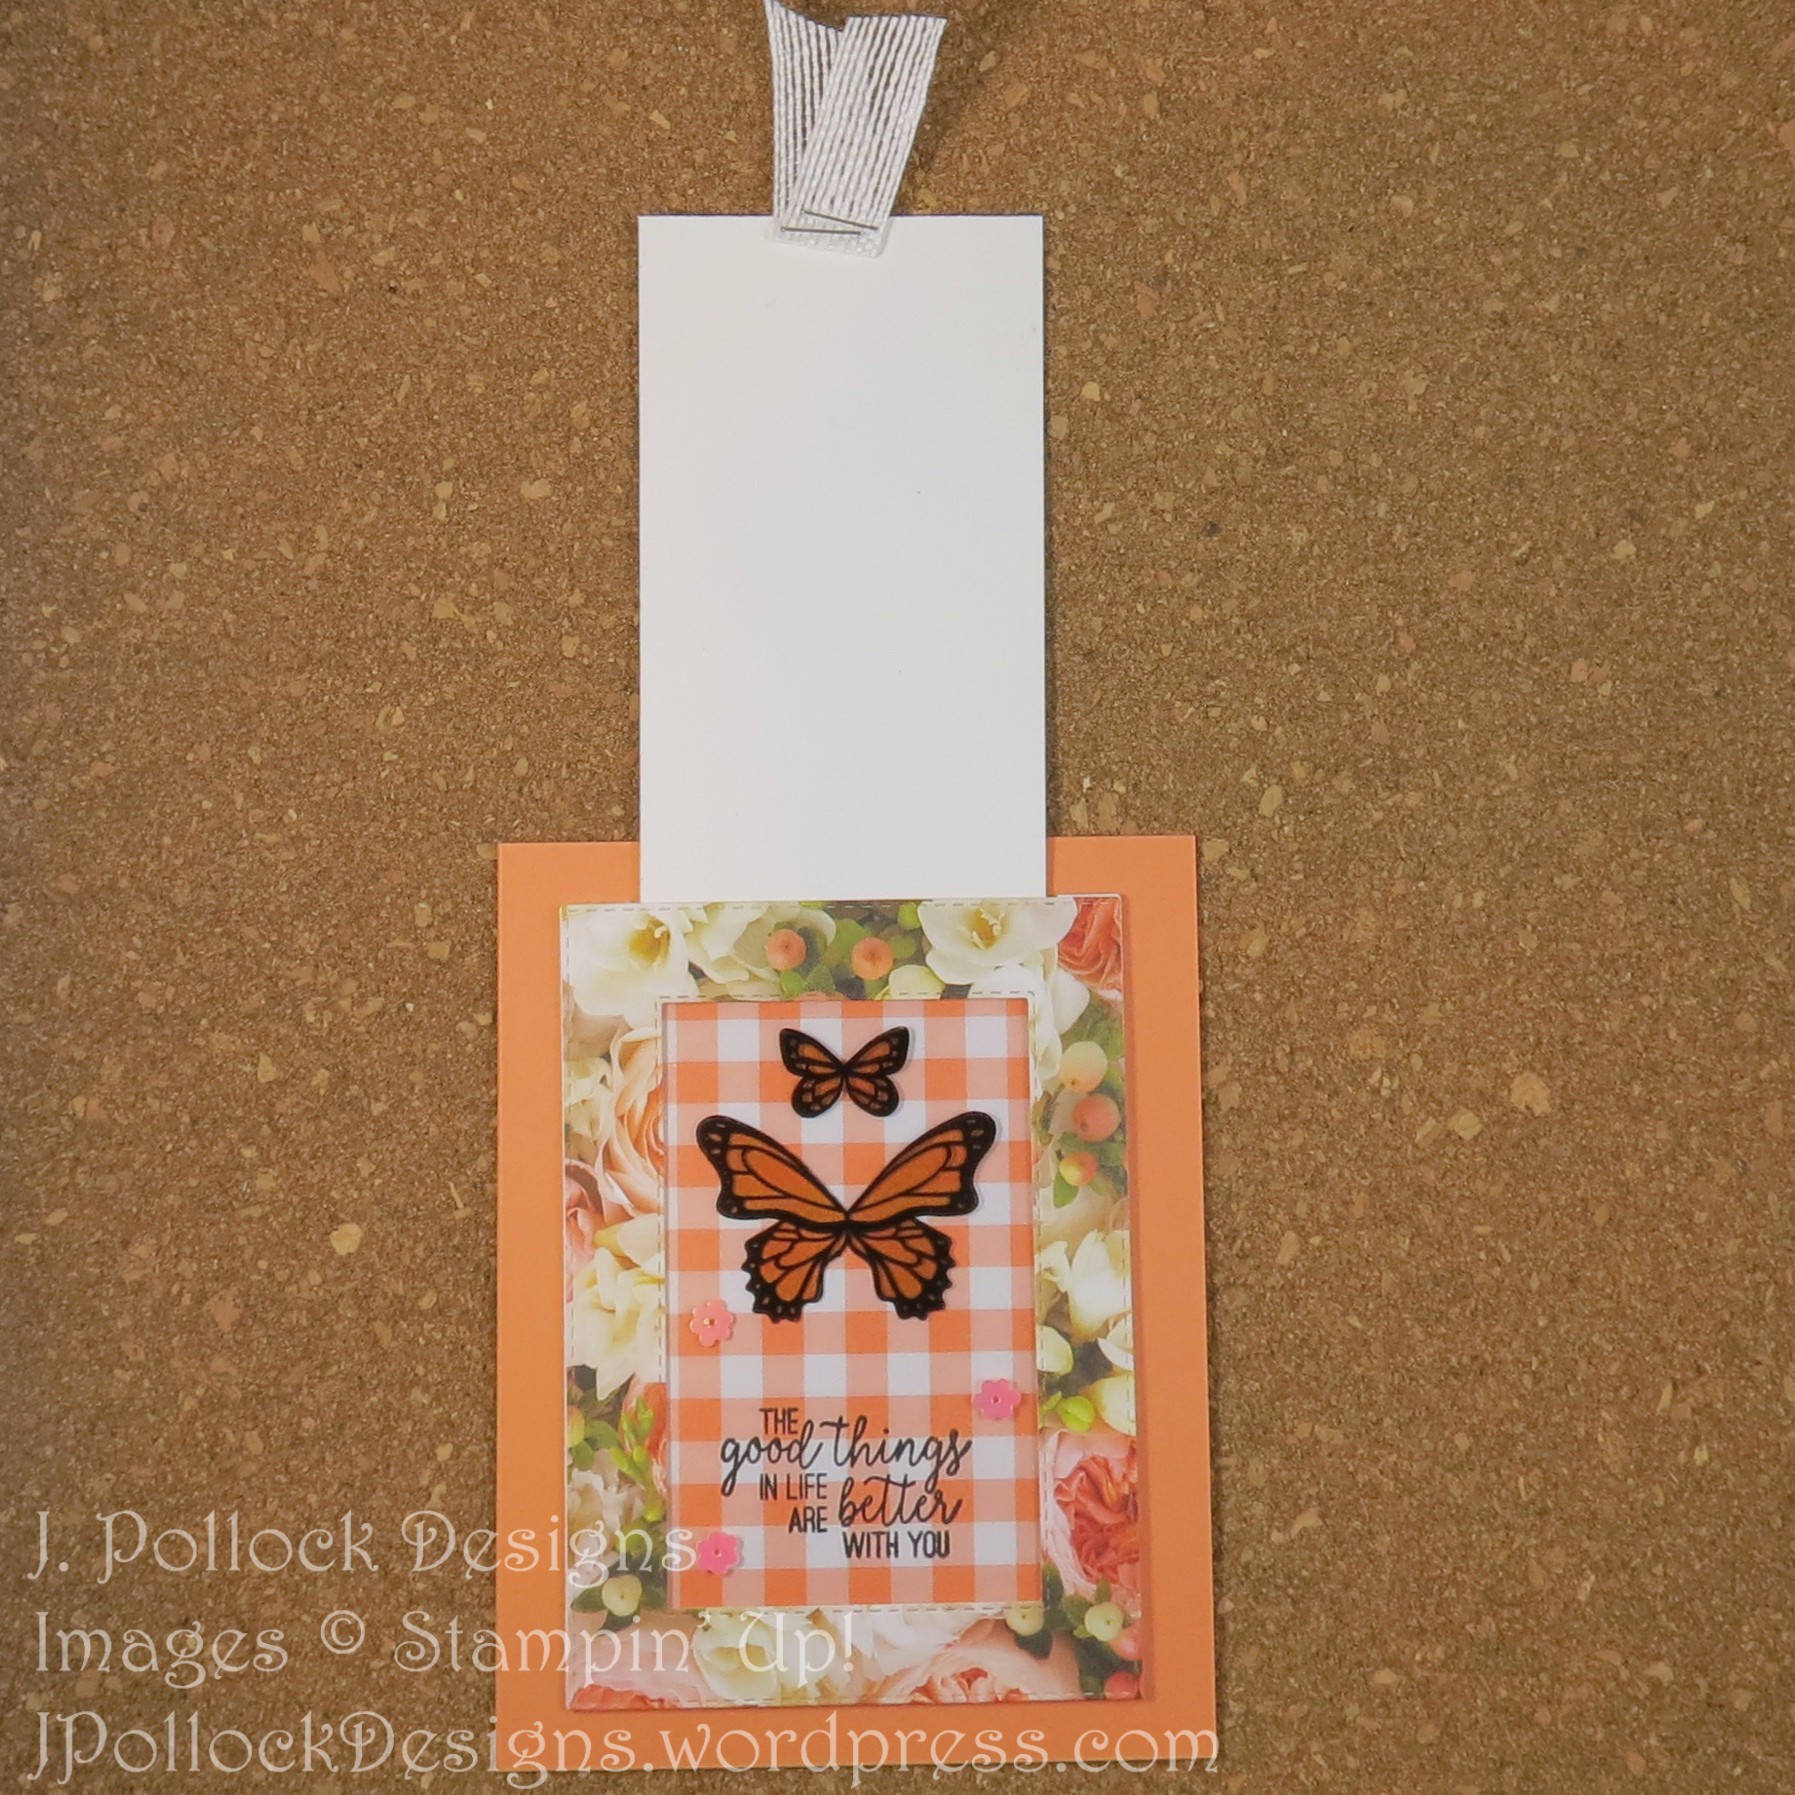 J. Pollock Designs - Stampin' Up! - Butterfly Gala